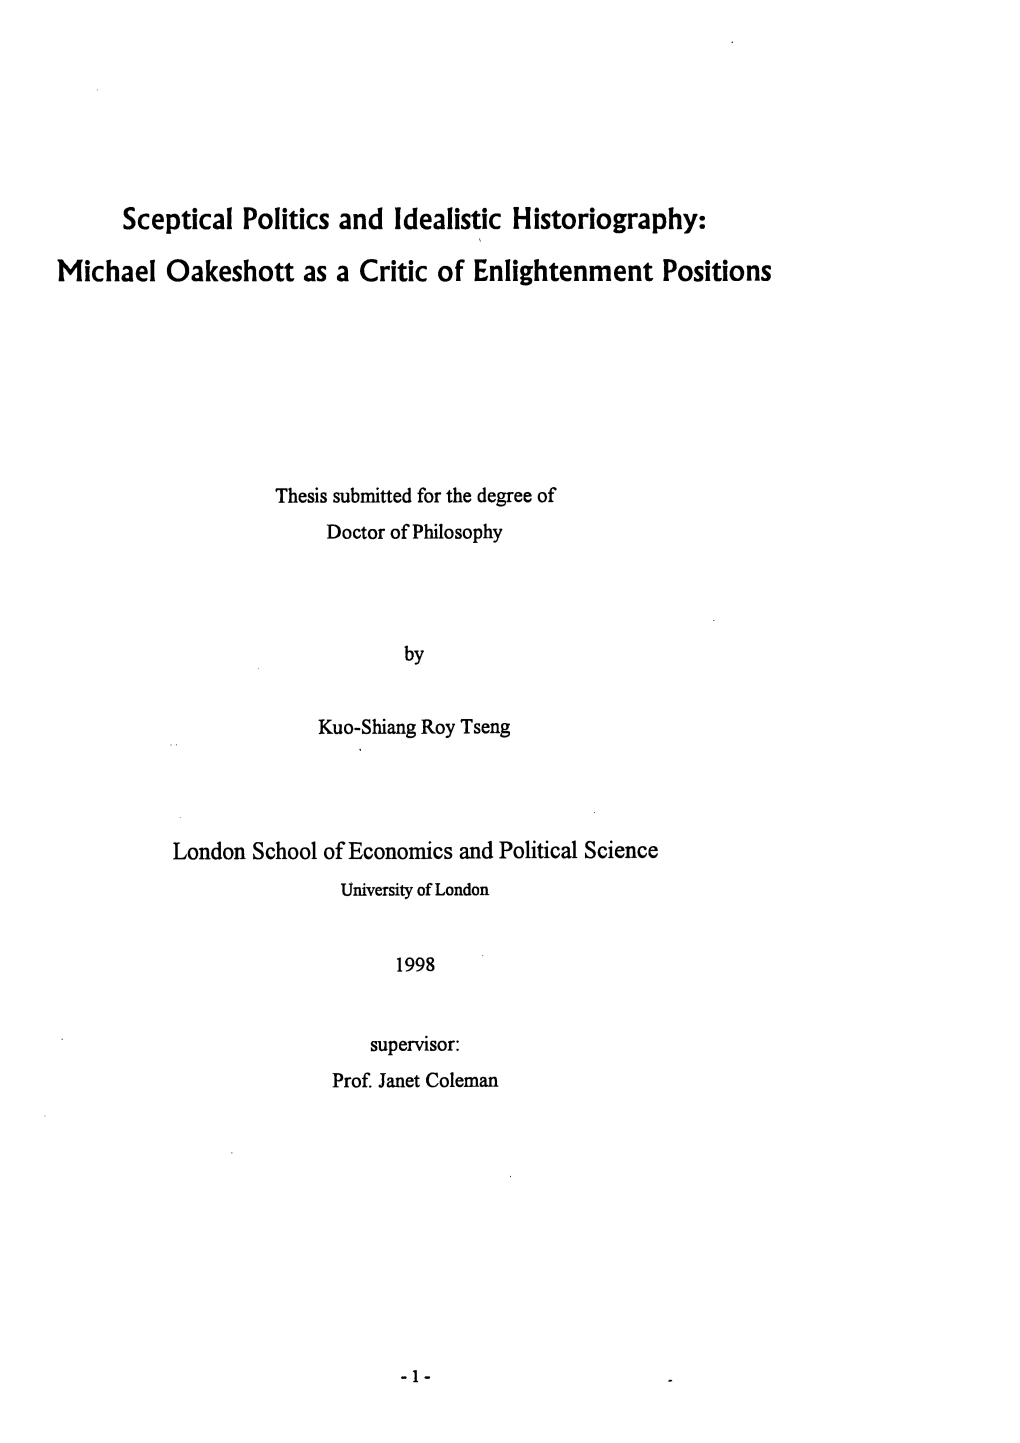 Sceptical Politics and Idealistic Historiography: Michael Oakeshott As a Critic of Enlightenment Positions